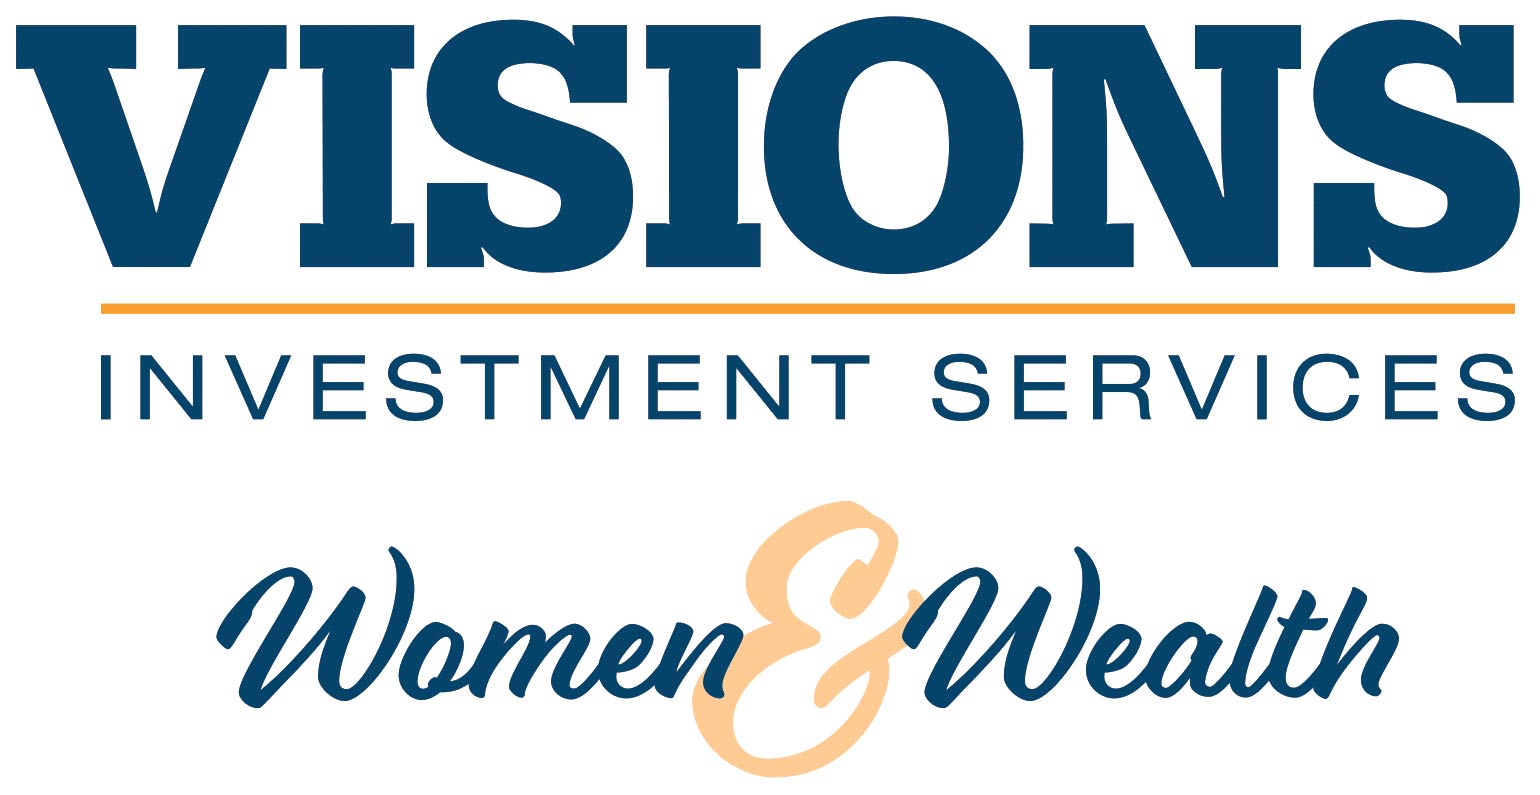 Women and Wealth logo